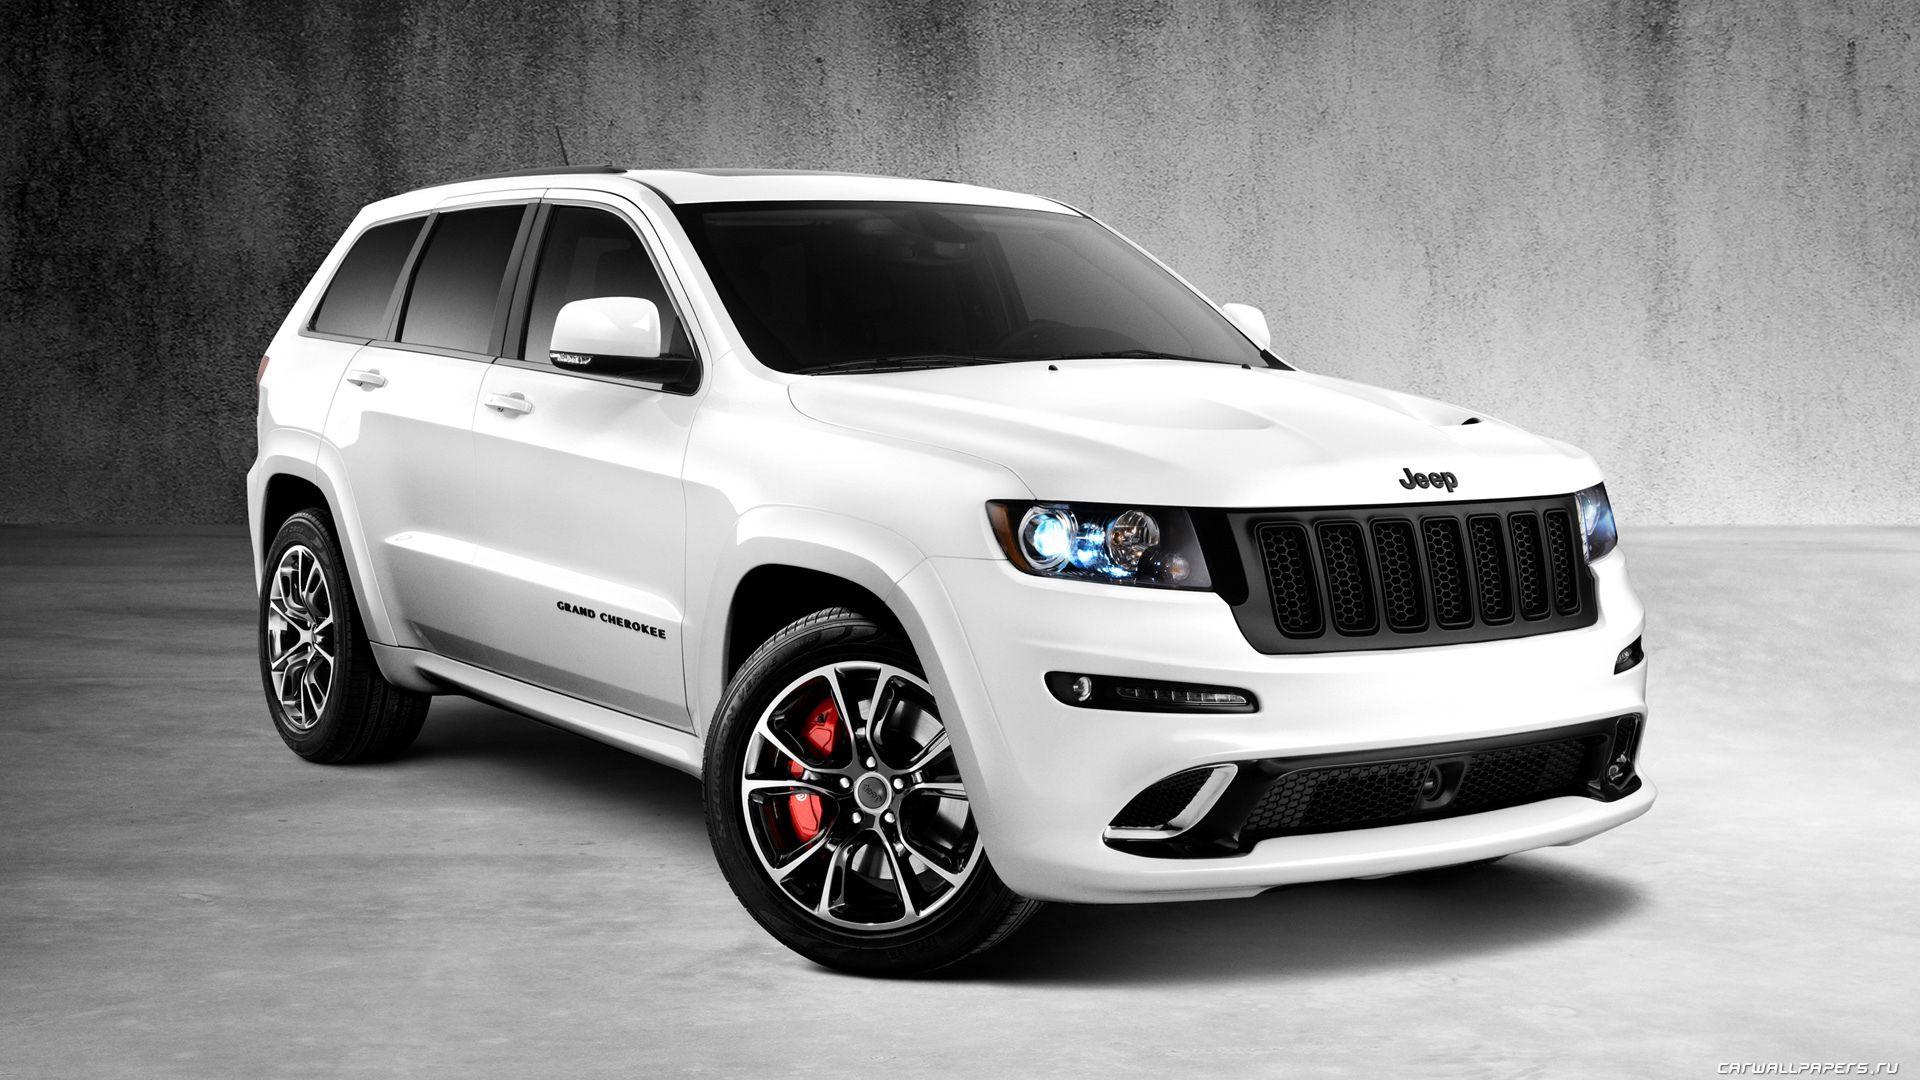 Jeep Grand Cherokee Wallpapers Top Free Jeep Grand Cherokee Backgrounds Wallpaperaccess